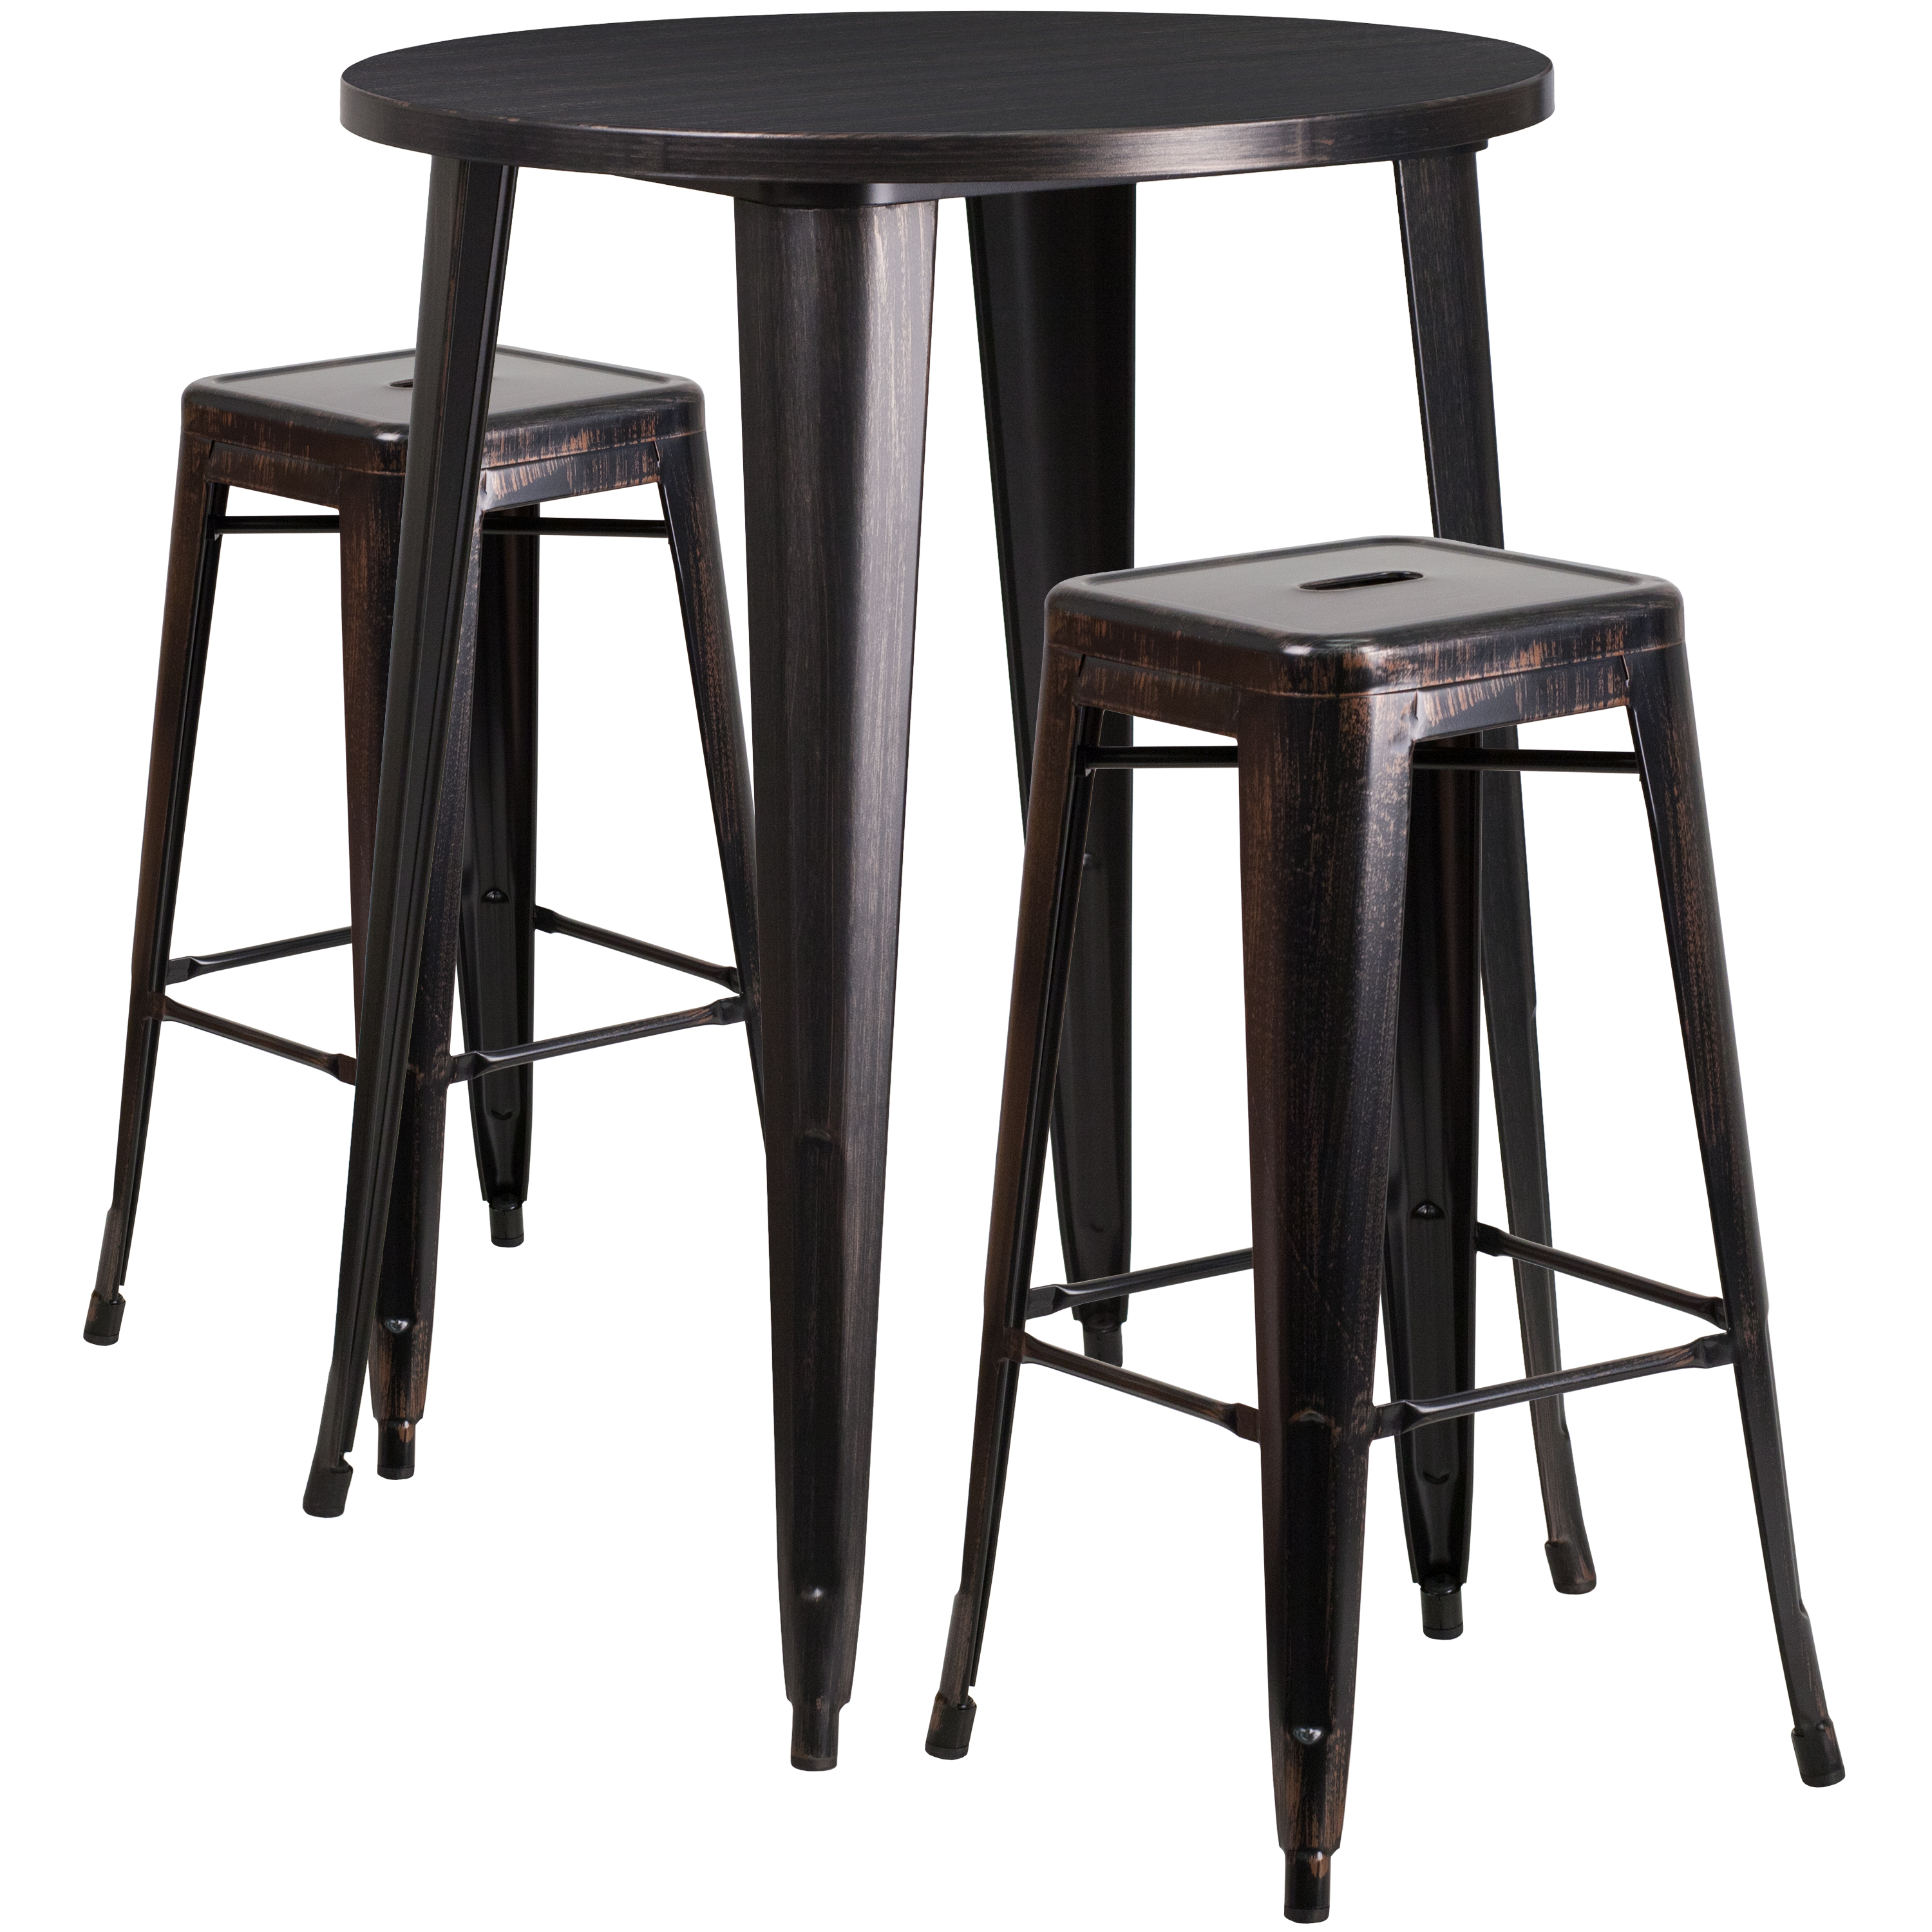 Flash Furniture Boyd Commercial Grade 30" Round Black-Antique Gold Metal Indoor-Outdoor Bar Table Set with 2 Square Seat Backless Stools - image 1 of 5